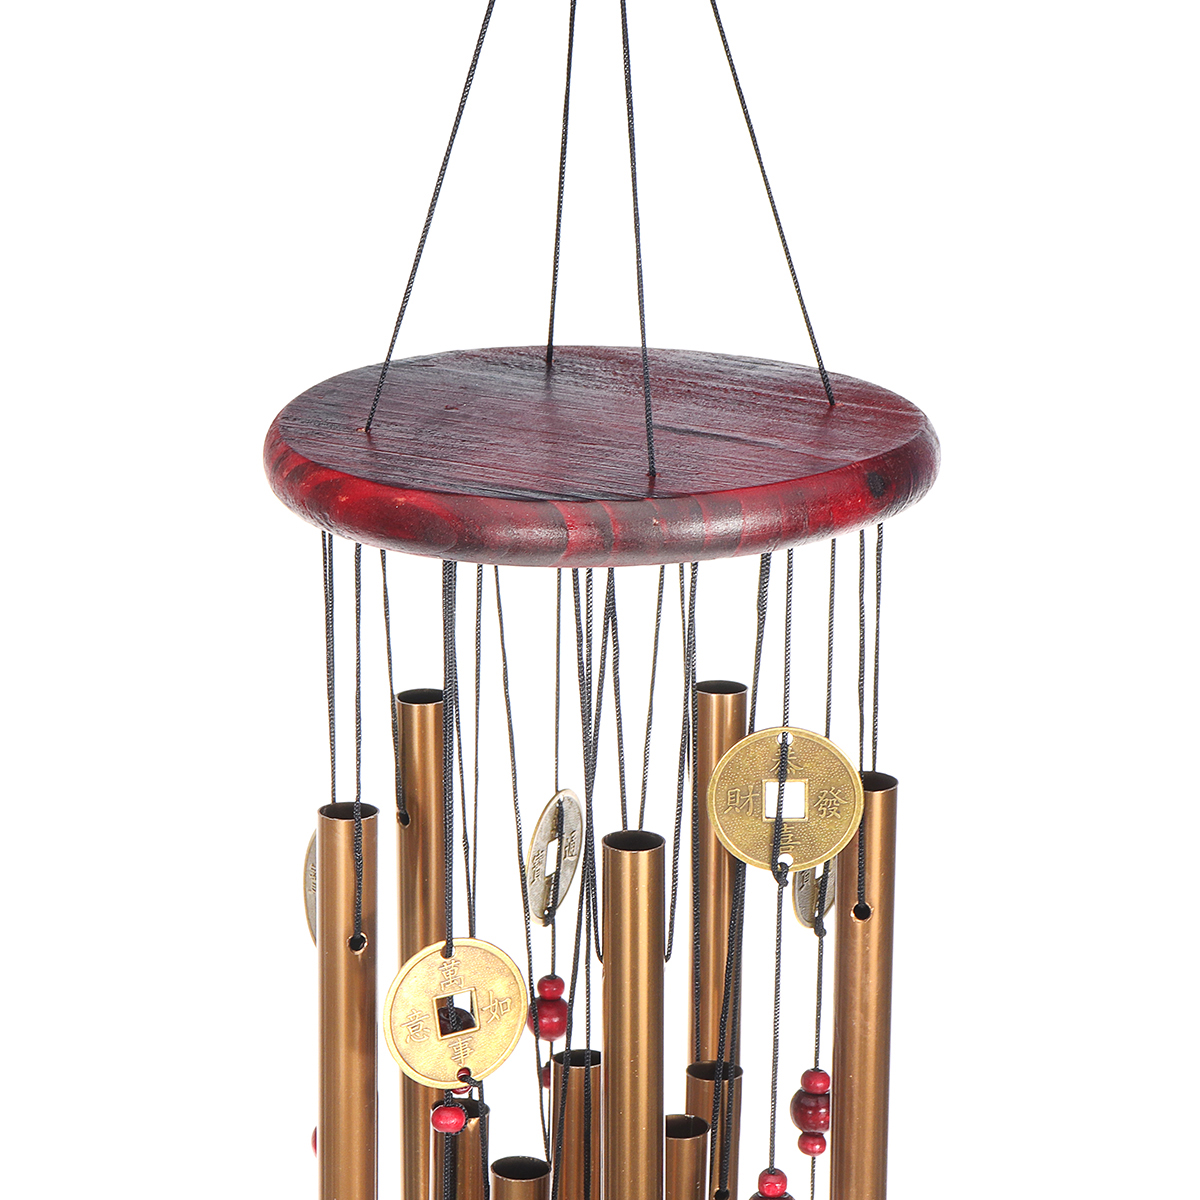 Wind-Chimes-Large-Tone-Resonant-Bell-10-Tubes-Chapel-Church-Garden-Decor-33quot-1694339-7